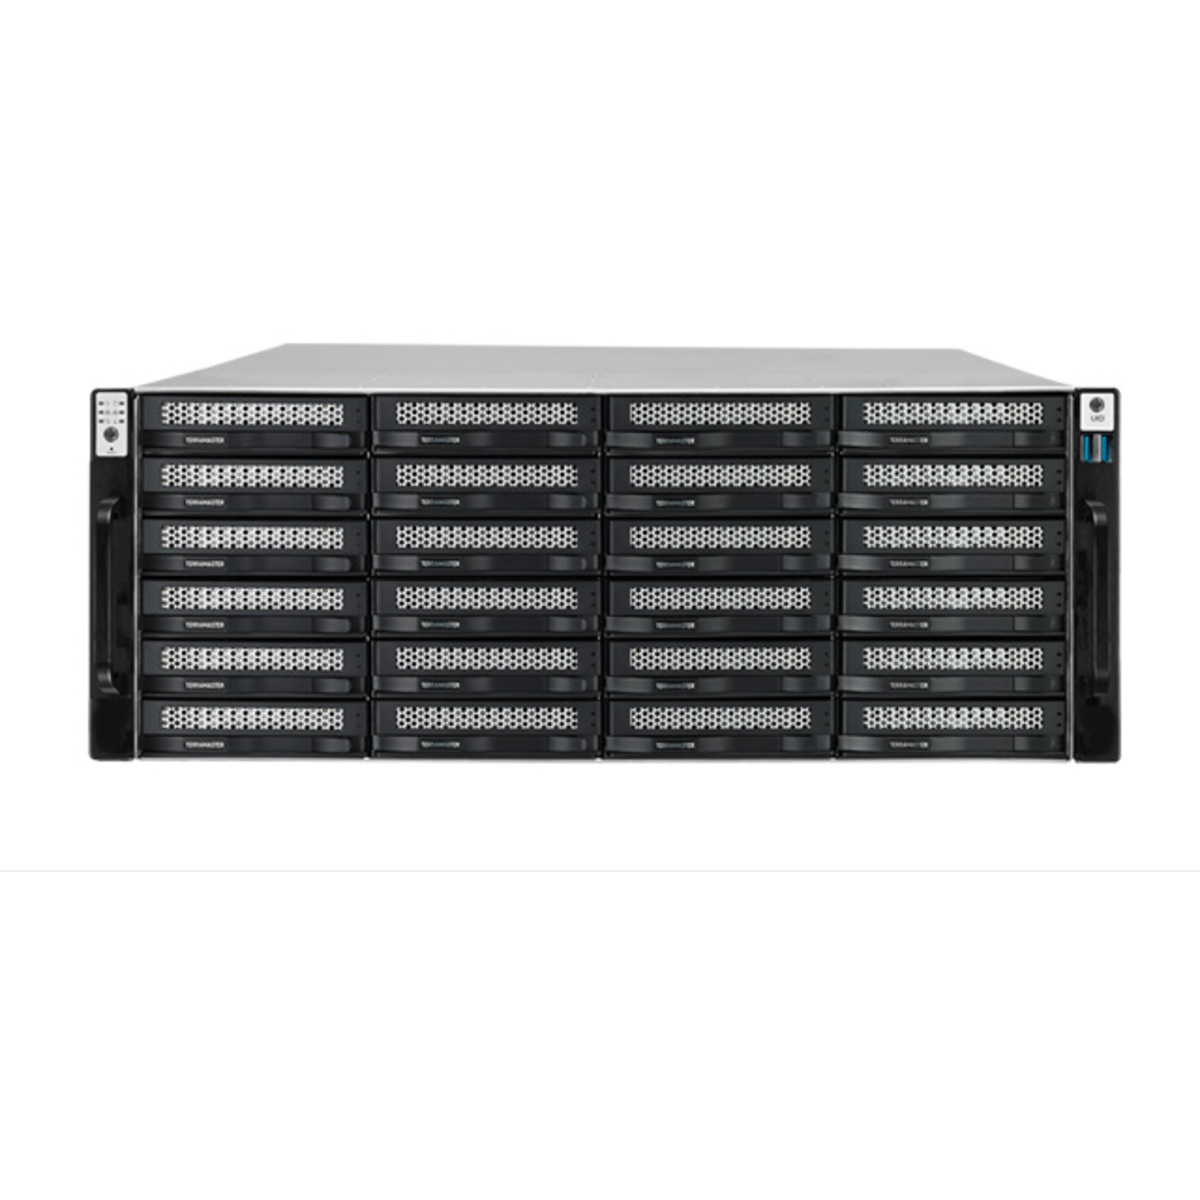 TerraMaster U24-722-2224 9.5tb 24-Bay RackMount Large Business / Enterprise NAS - Network Attached Storage Device 19x500gb Samsung 870 EVO MZ-77E500BAM 2.5 560/530MB/s SATA 6Gb/s SSD CONSUMER Class Drives Installed - Burn-In Tested U24-722-2224